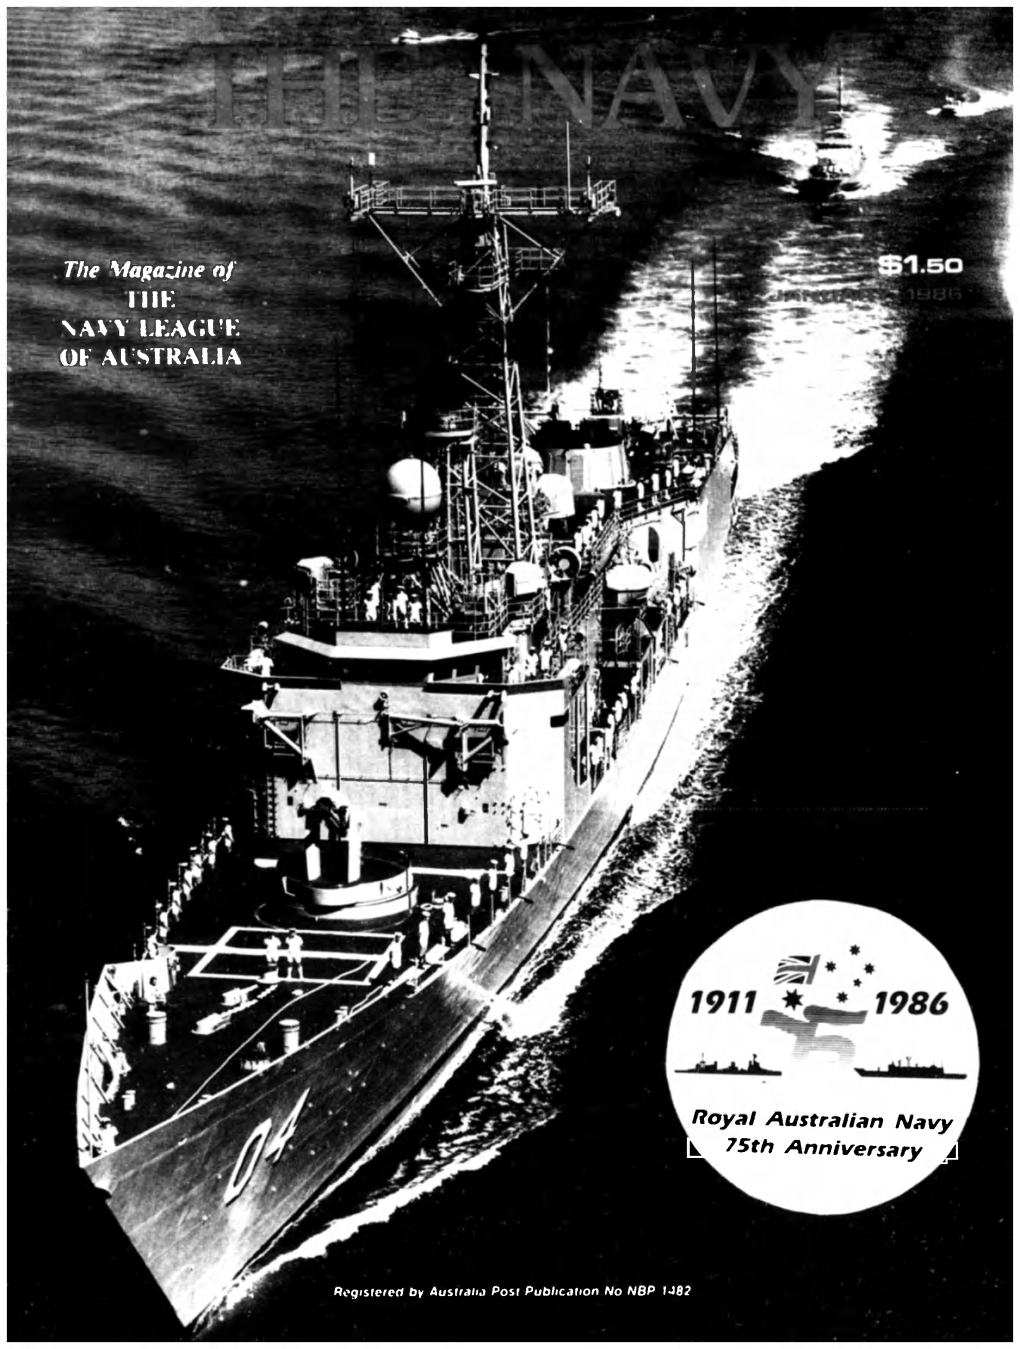 The Navy Vol 48 Part 1 1986 (Jan and Apr 1986)